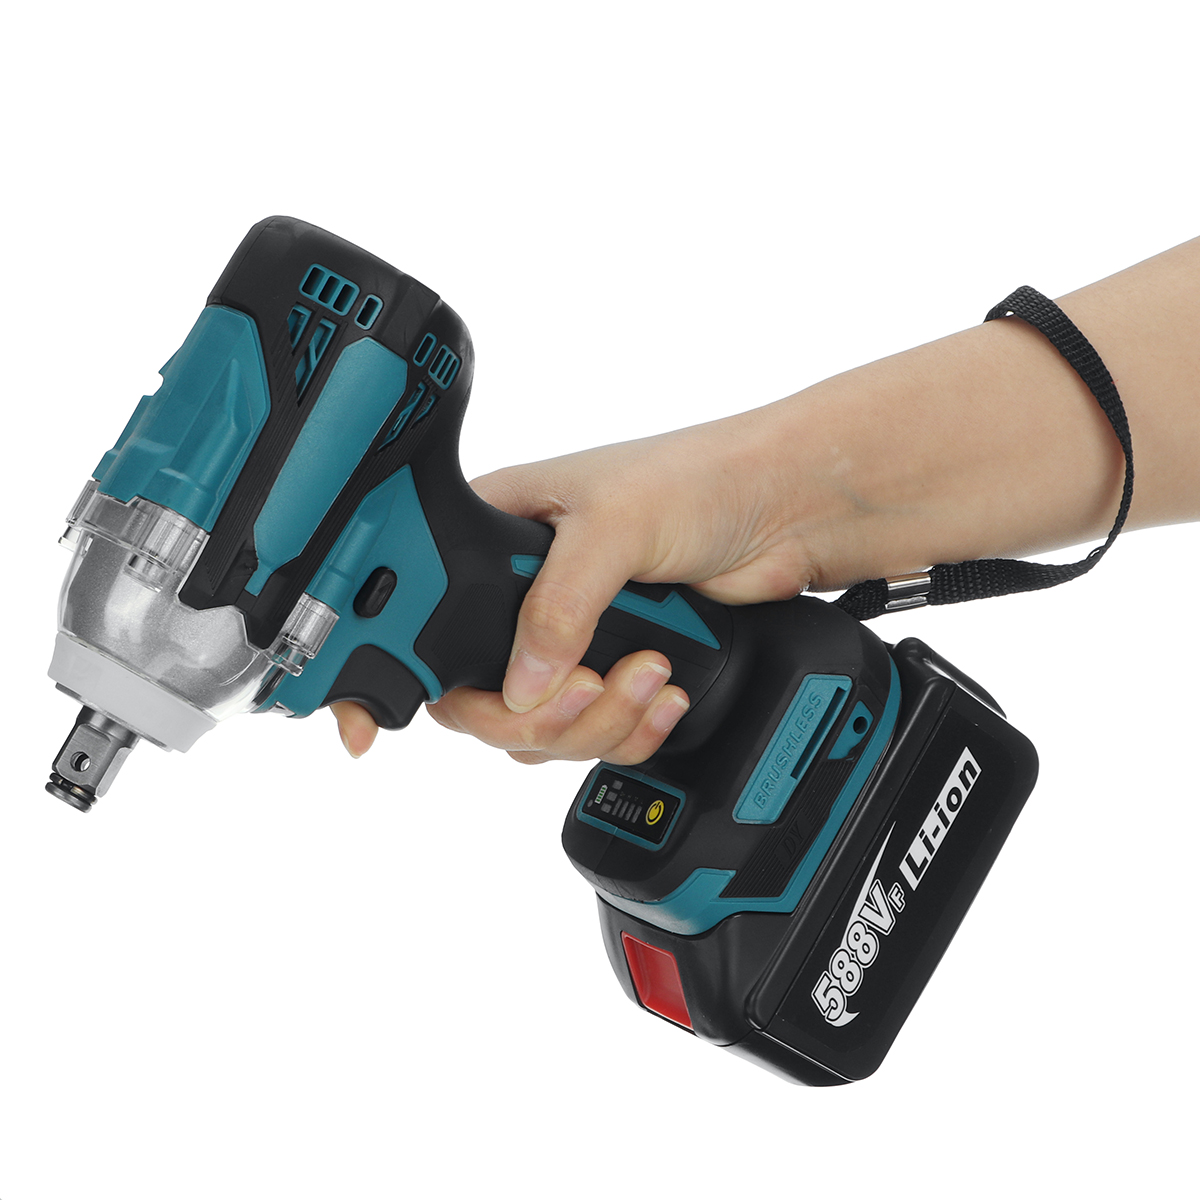 588VF-480Nm-Brushless-Cordless-Electric-Wrench-Li-Ion-Battery-Wrench-Power-Tool-W-12-Battery--Storag-1861486-8